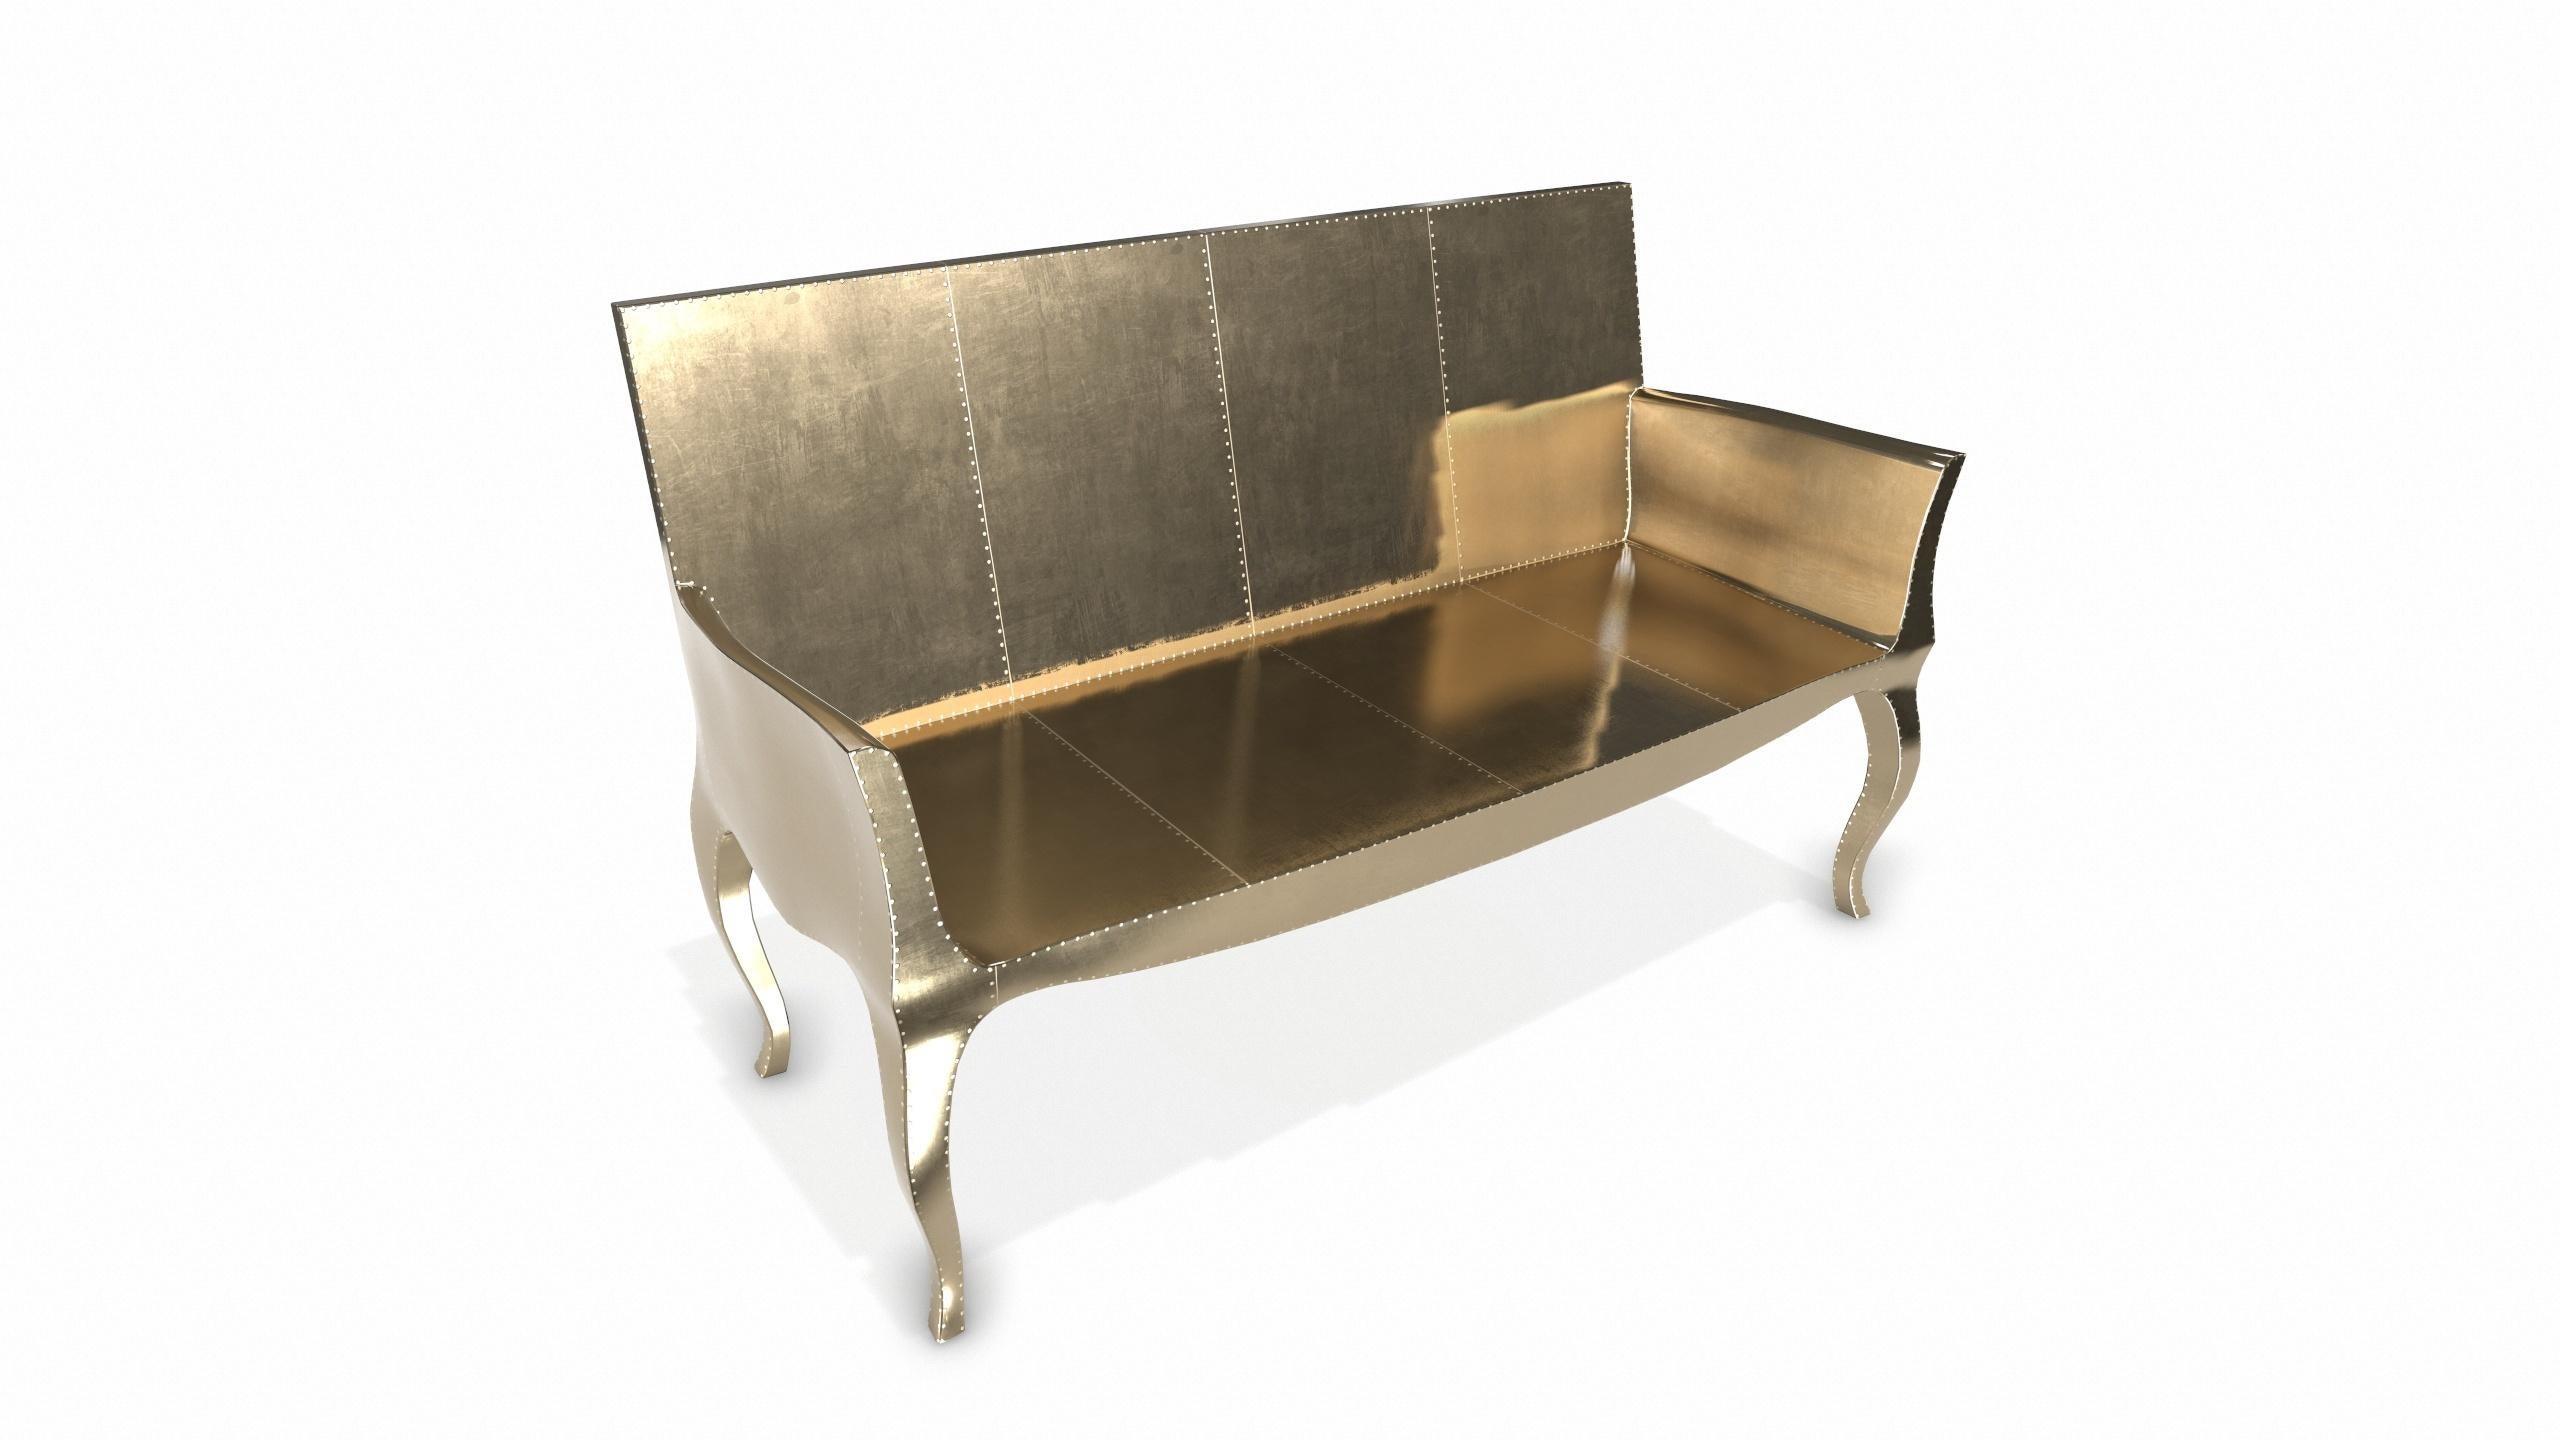 Louise Settee Art Deco Loveseats in Smooth Brass by Paul Mathieu For Sale 2